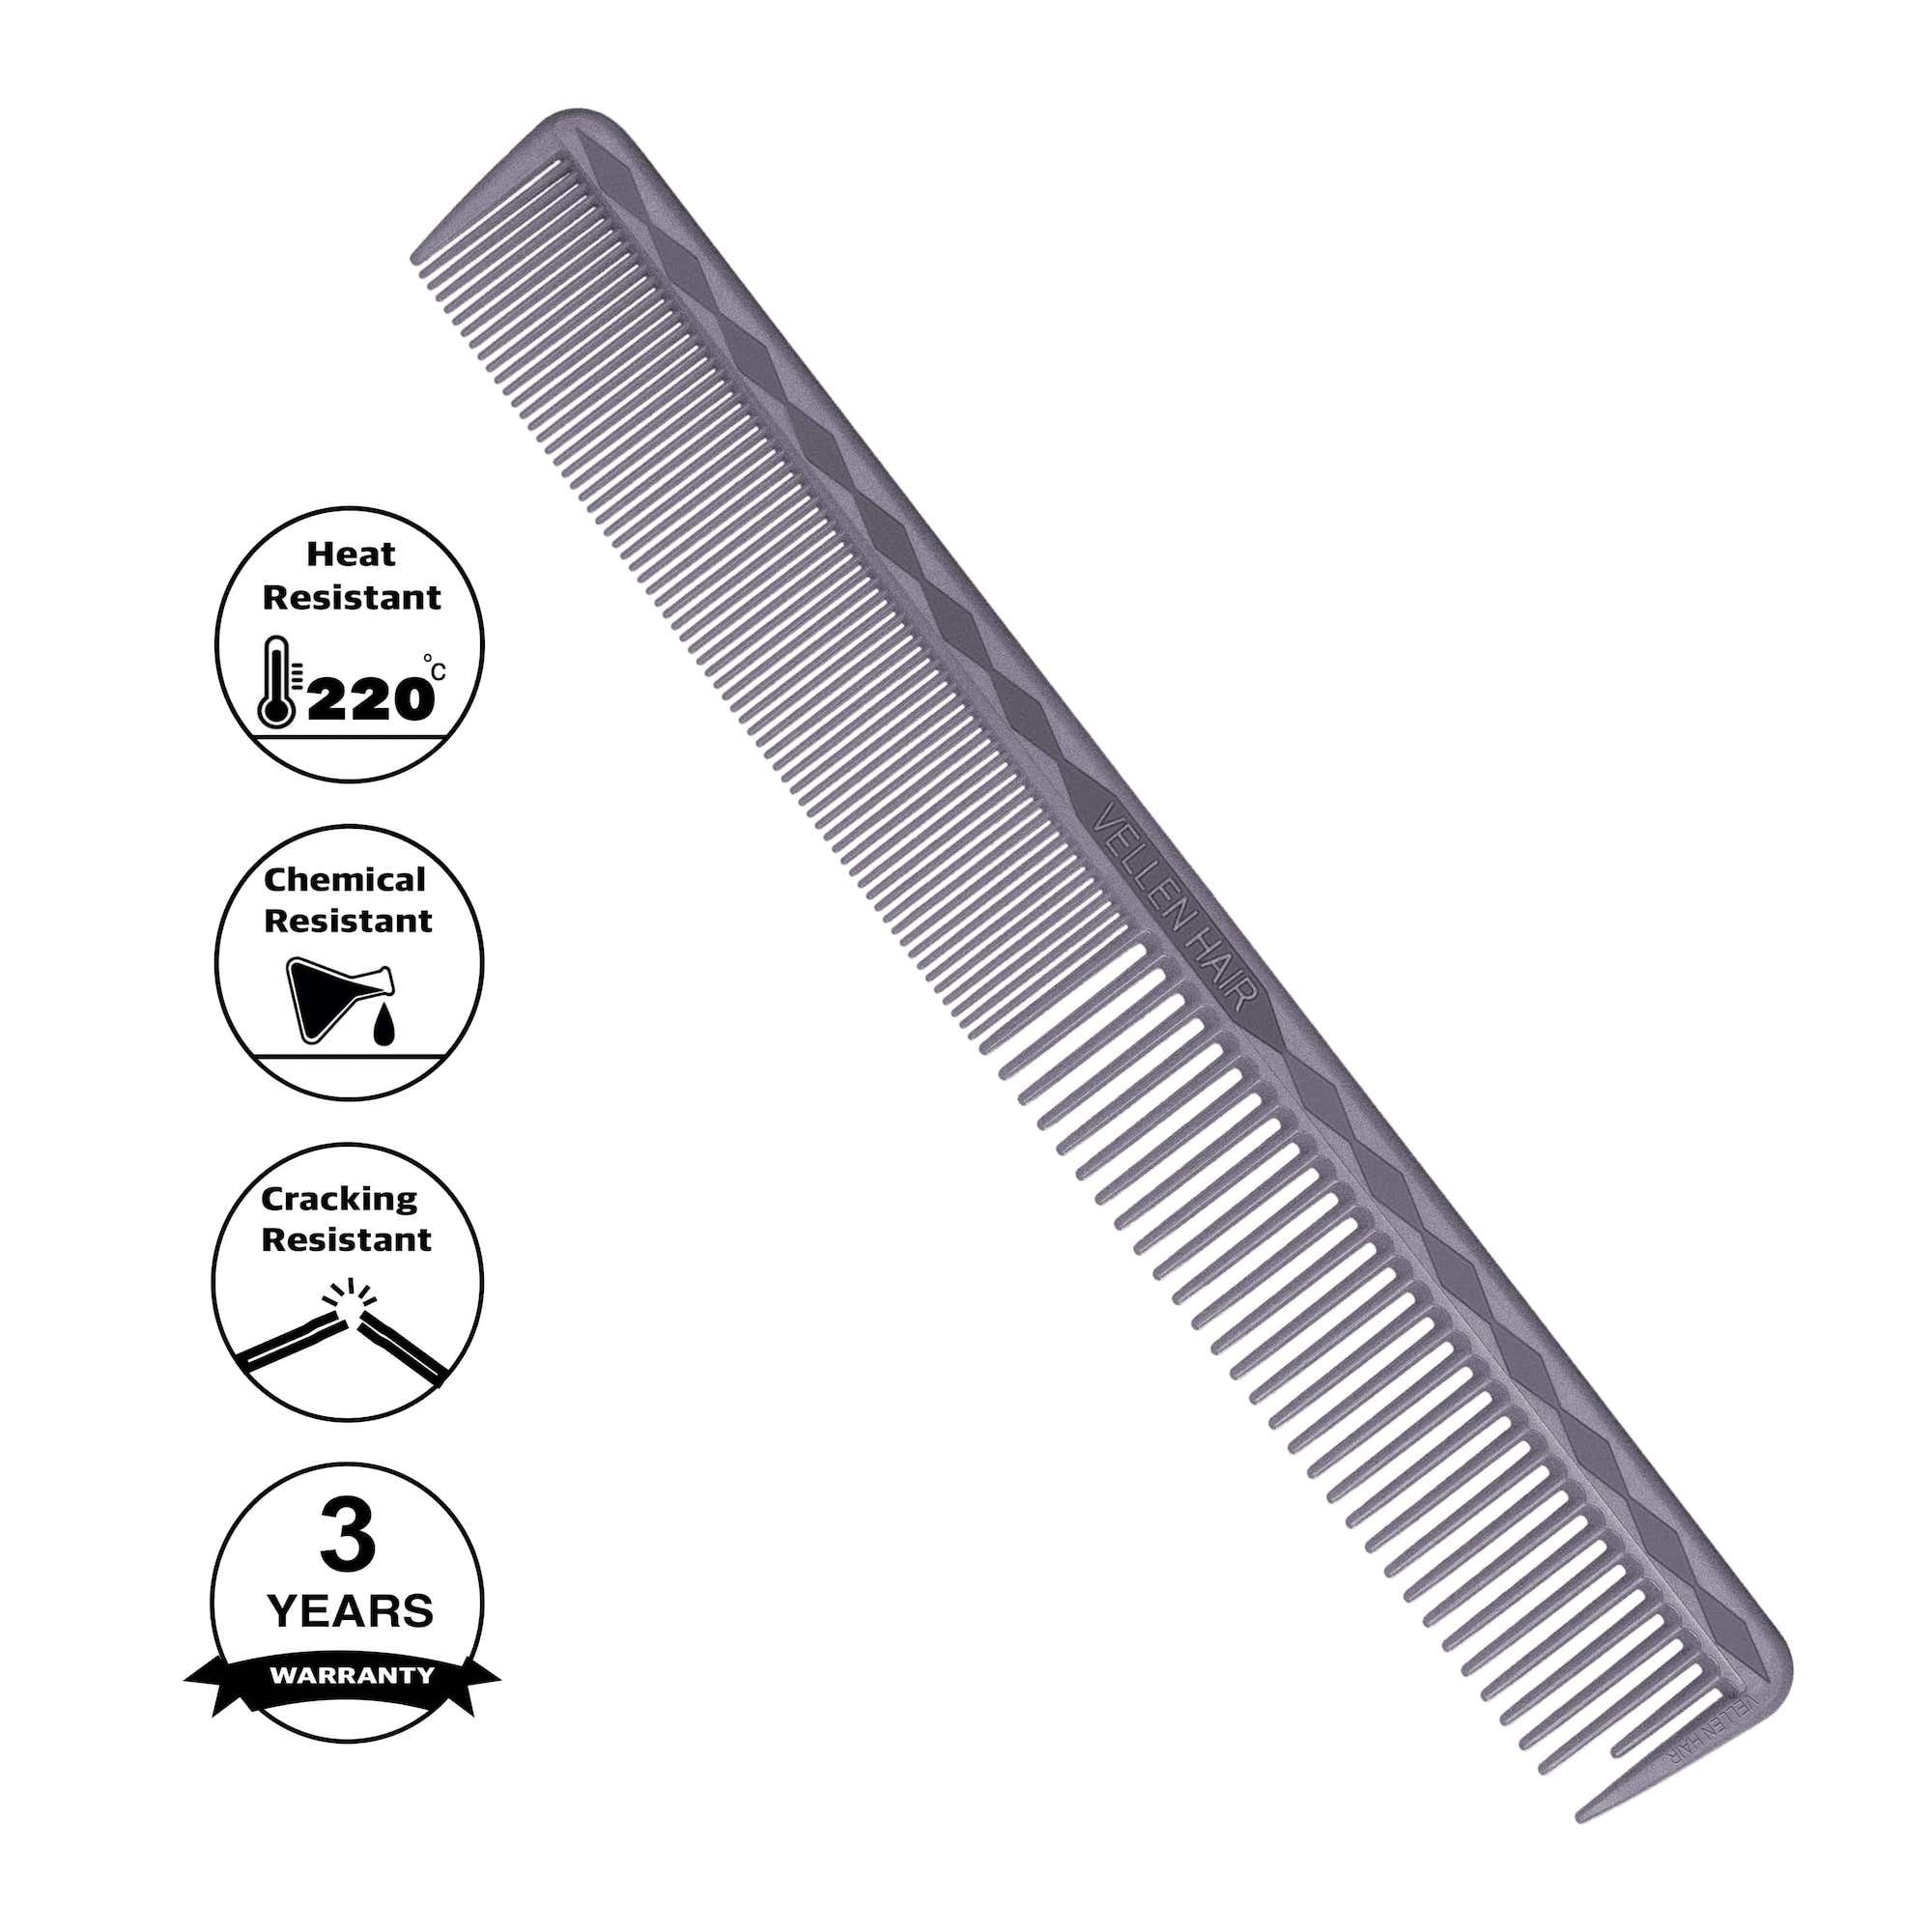 Vellen Hair® Ultimate Cutting Comb - VH202 - 17.8 cm / 7 inch - Gray